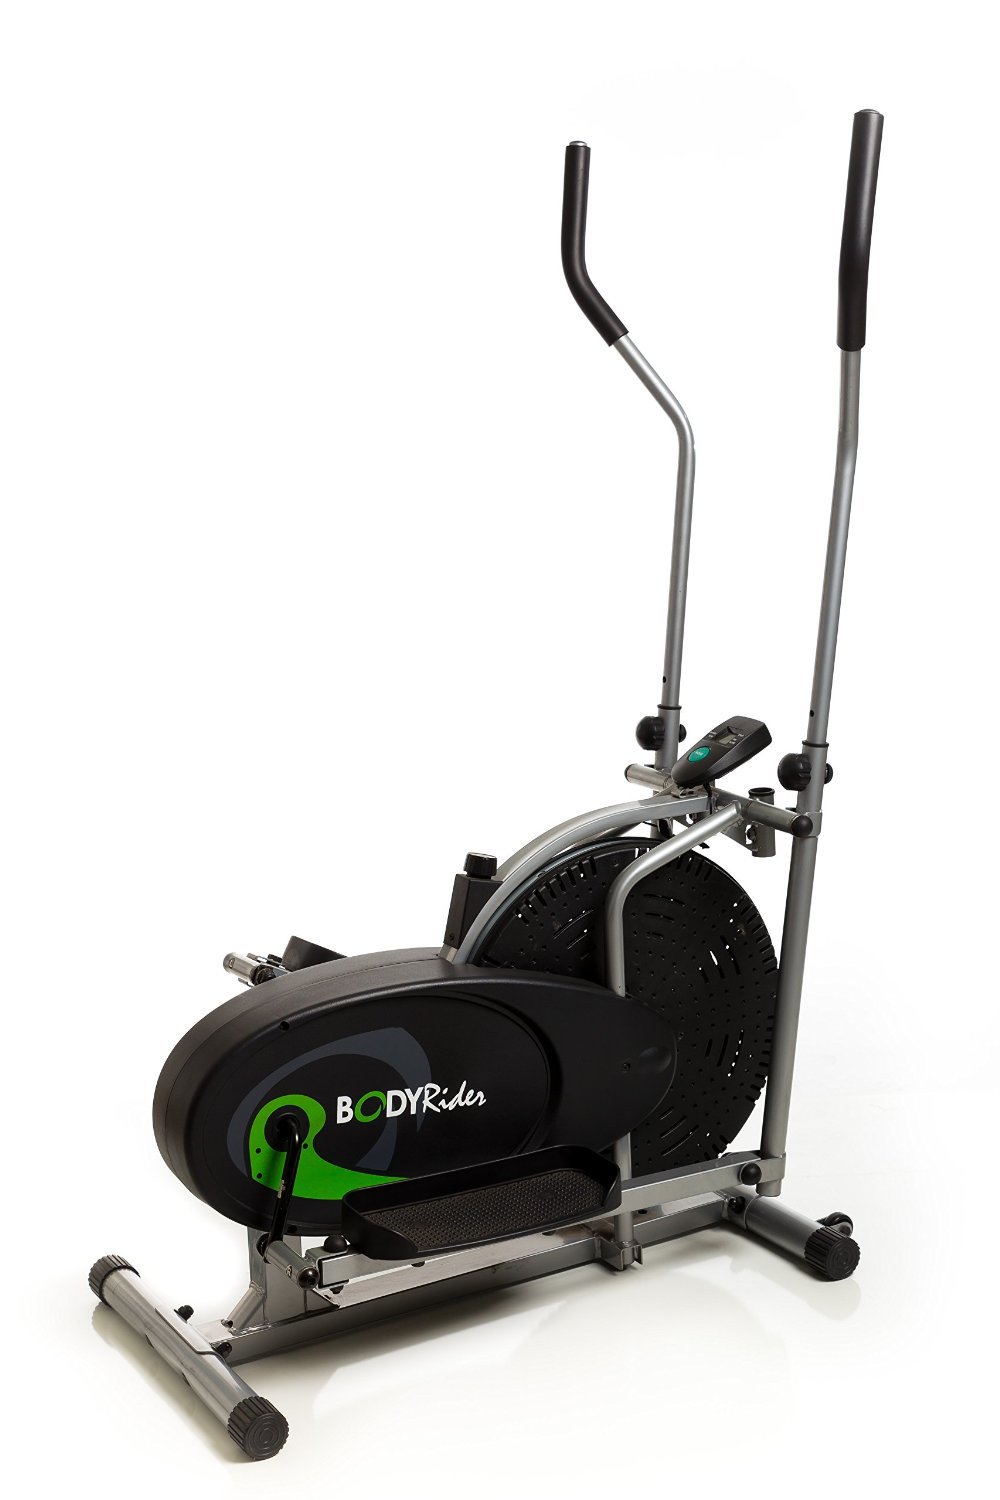 image showing the Body Rider Fan Elliptical Trainer